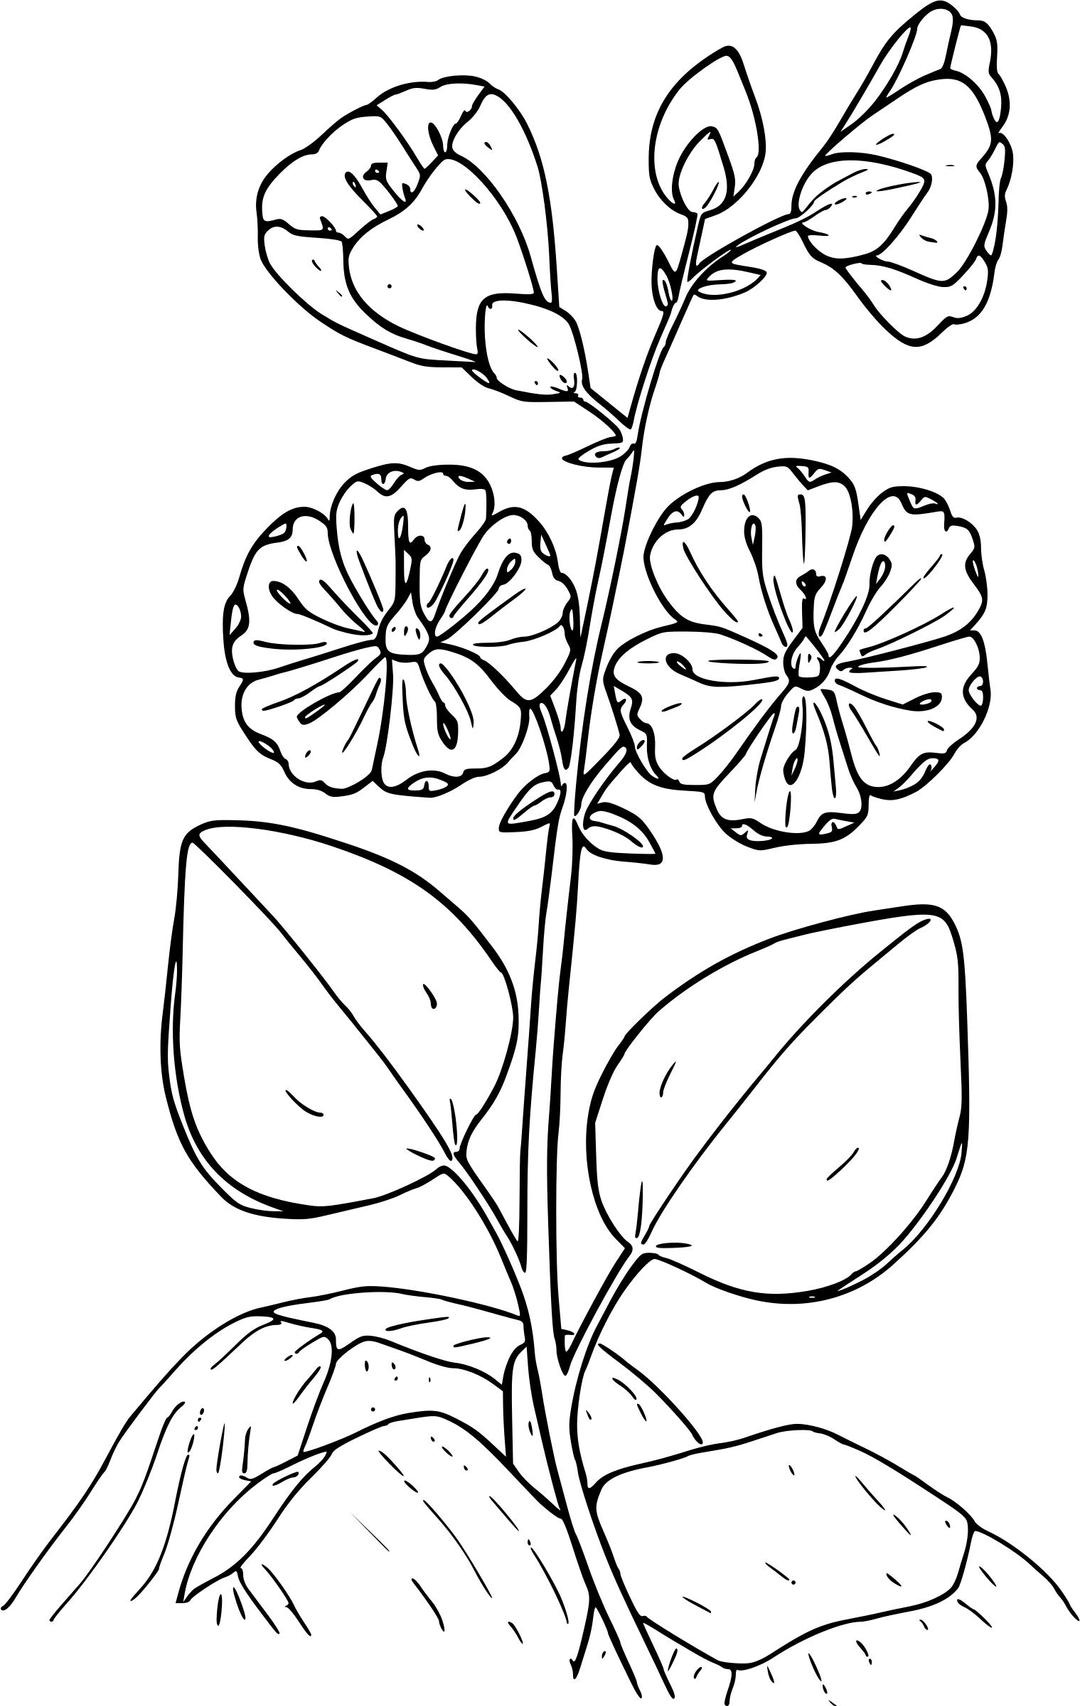 Umbellate spring beauty png transparent